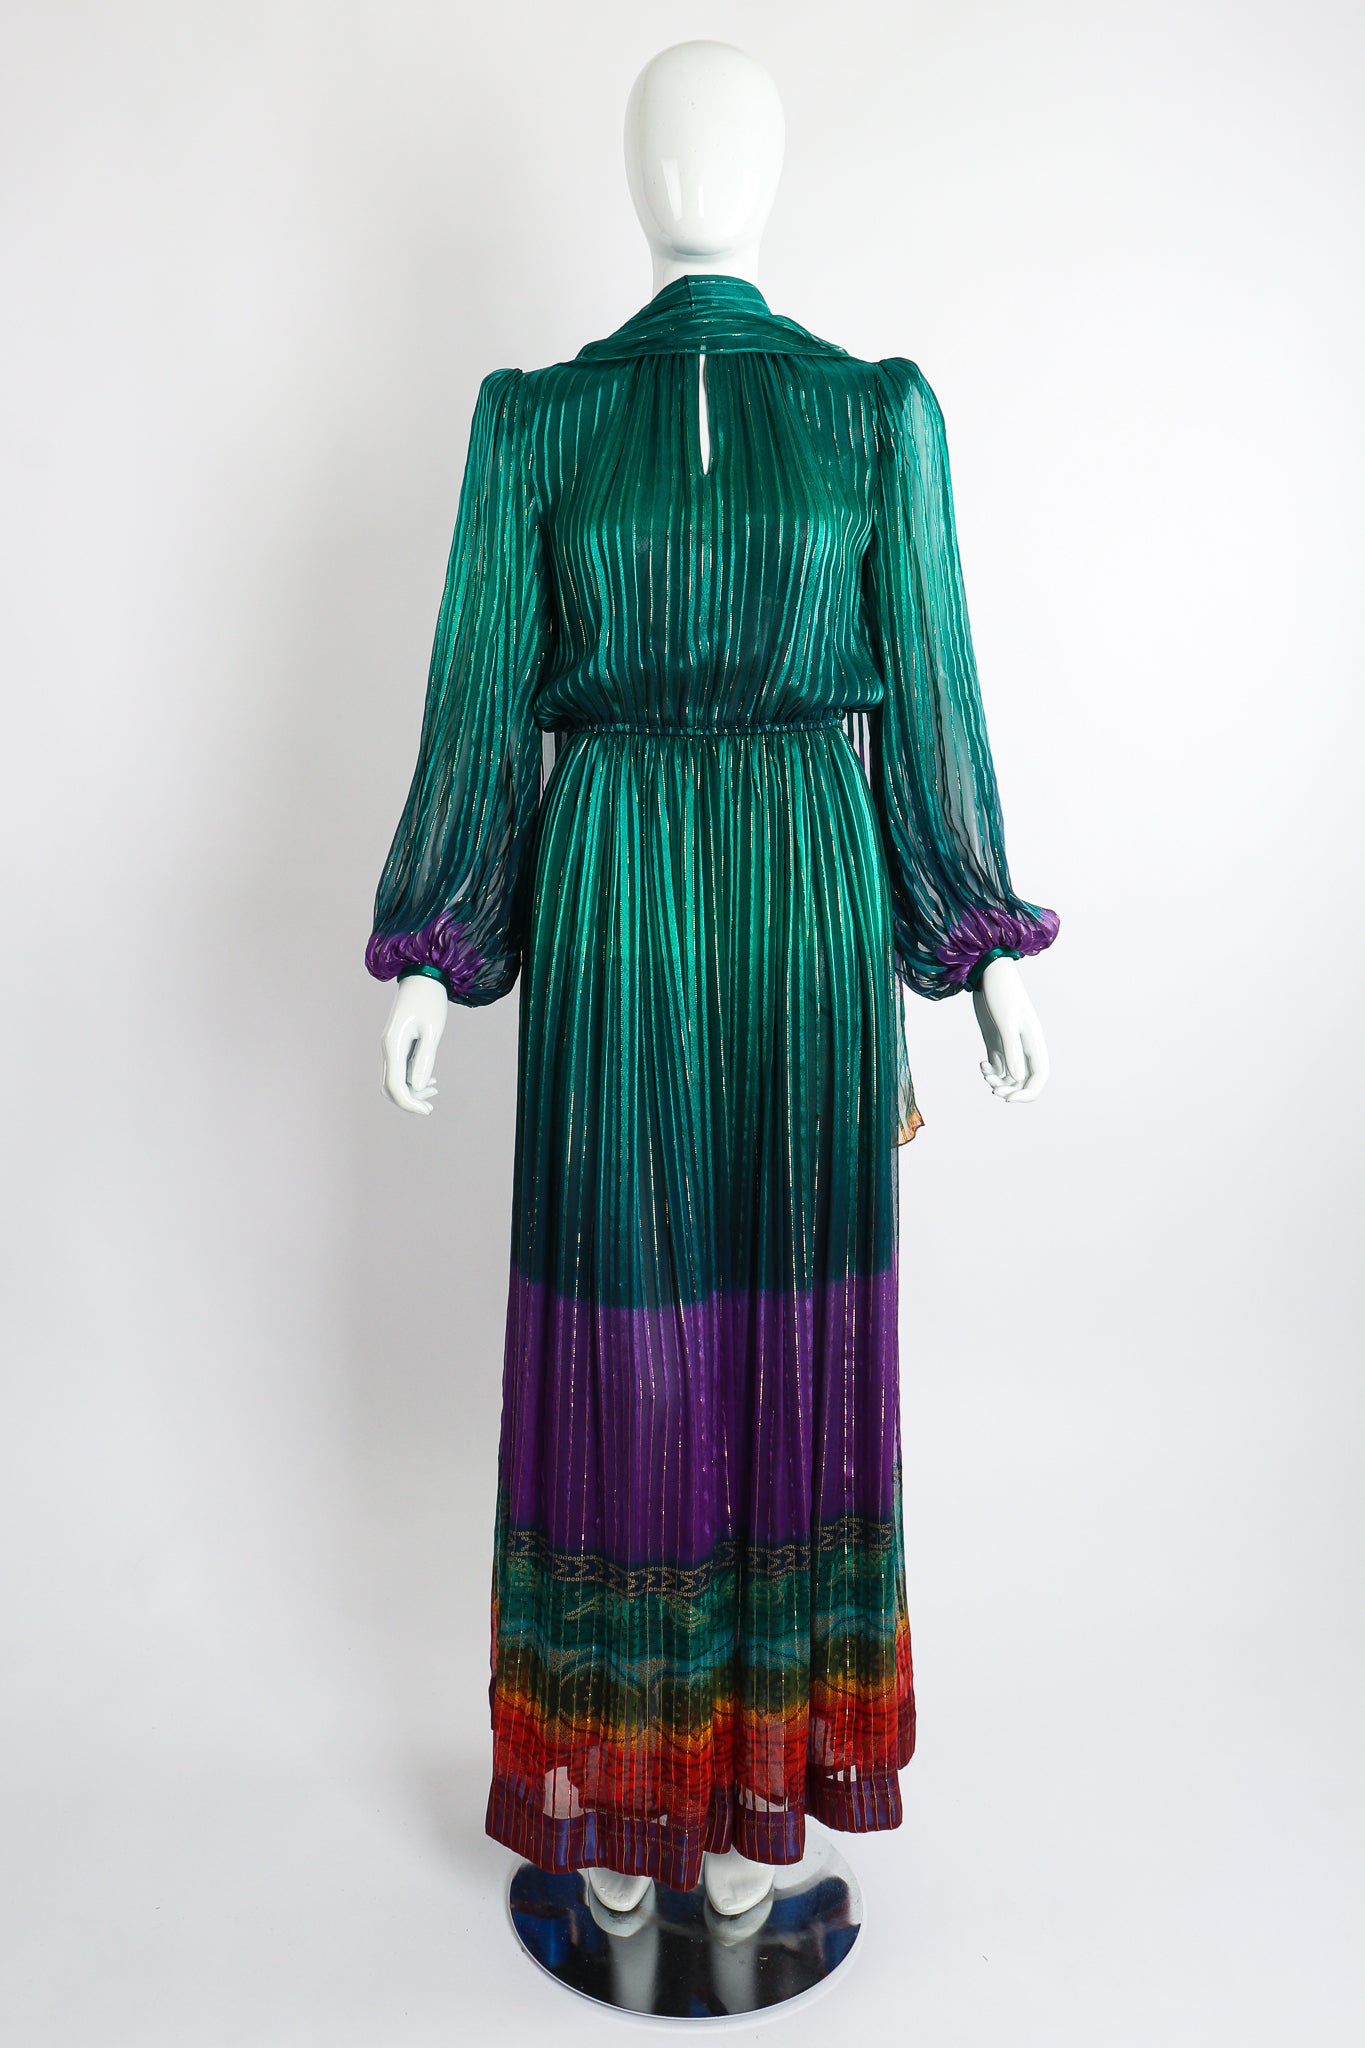 Vintage Soo Yung Lee Chiffon Rainbow Ombré Dress on Mannequin Skirt front at Recess Los Angeles